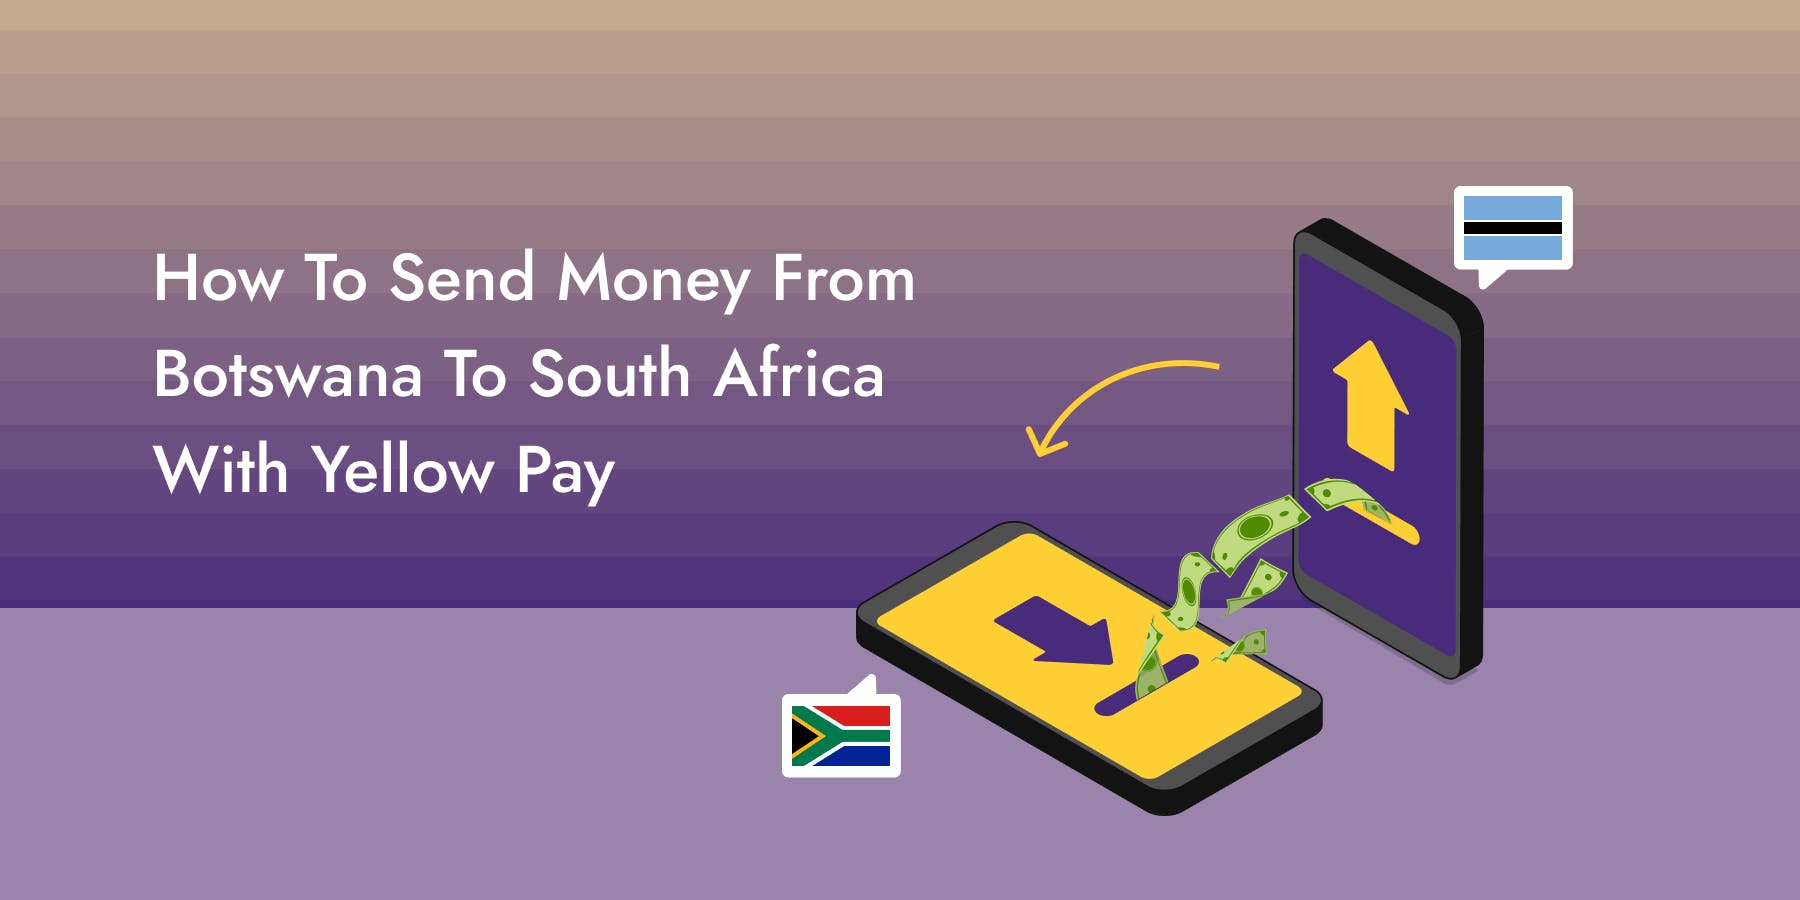 How To Send Money From Botswana To South Africa